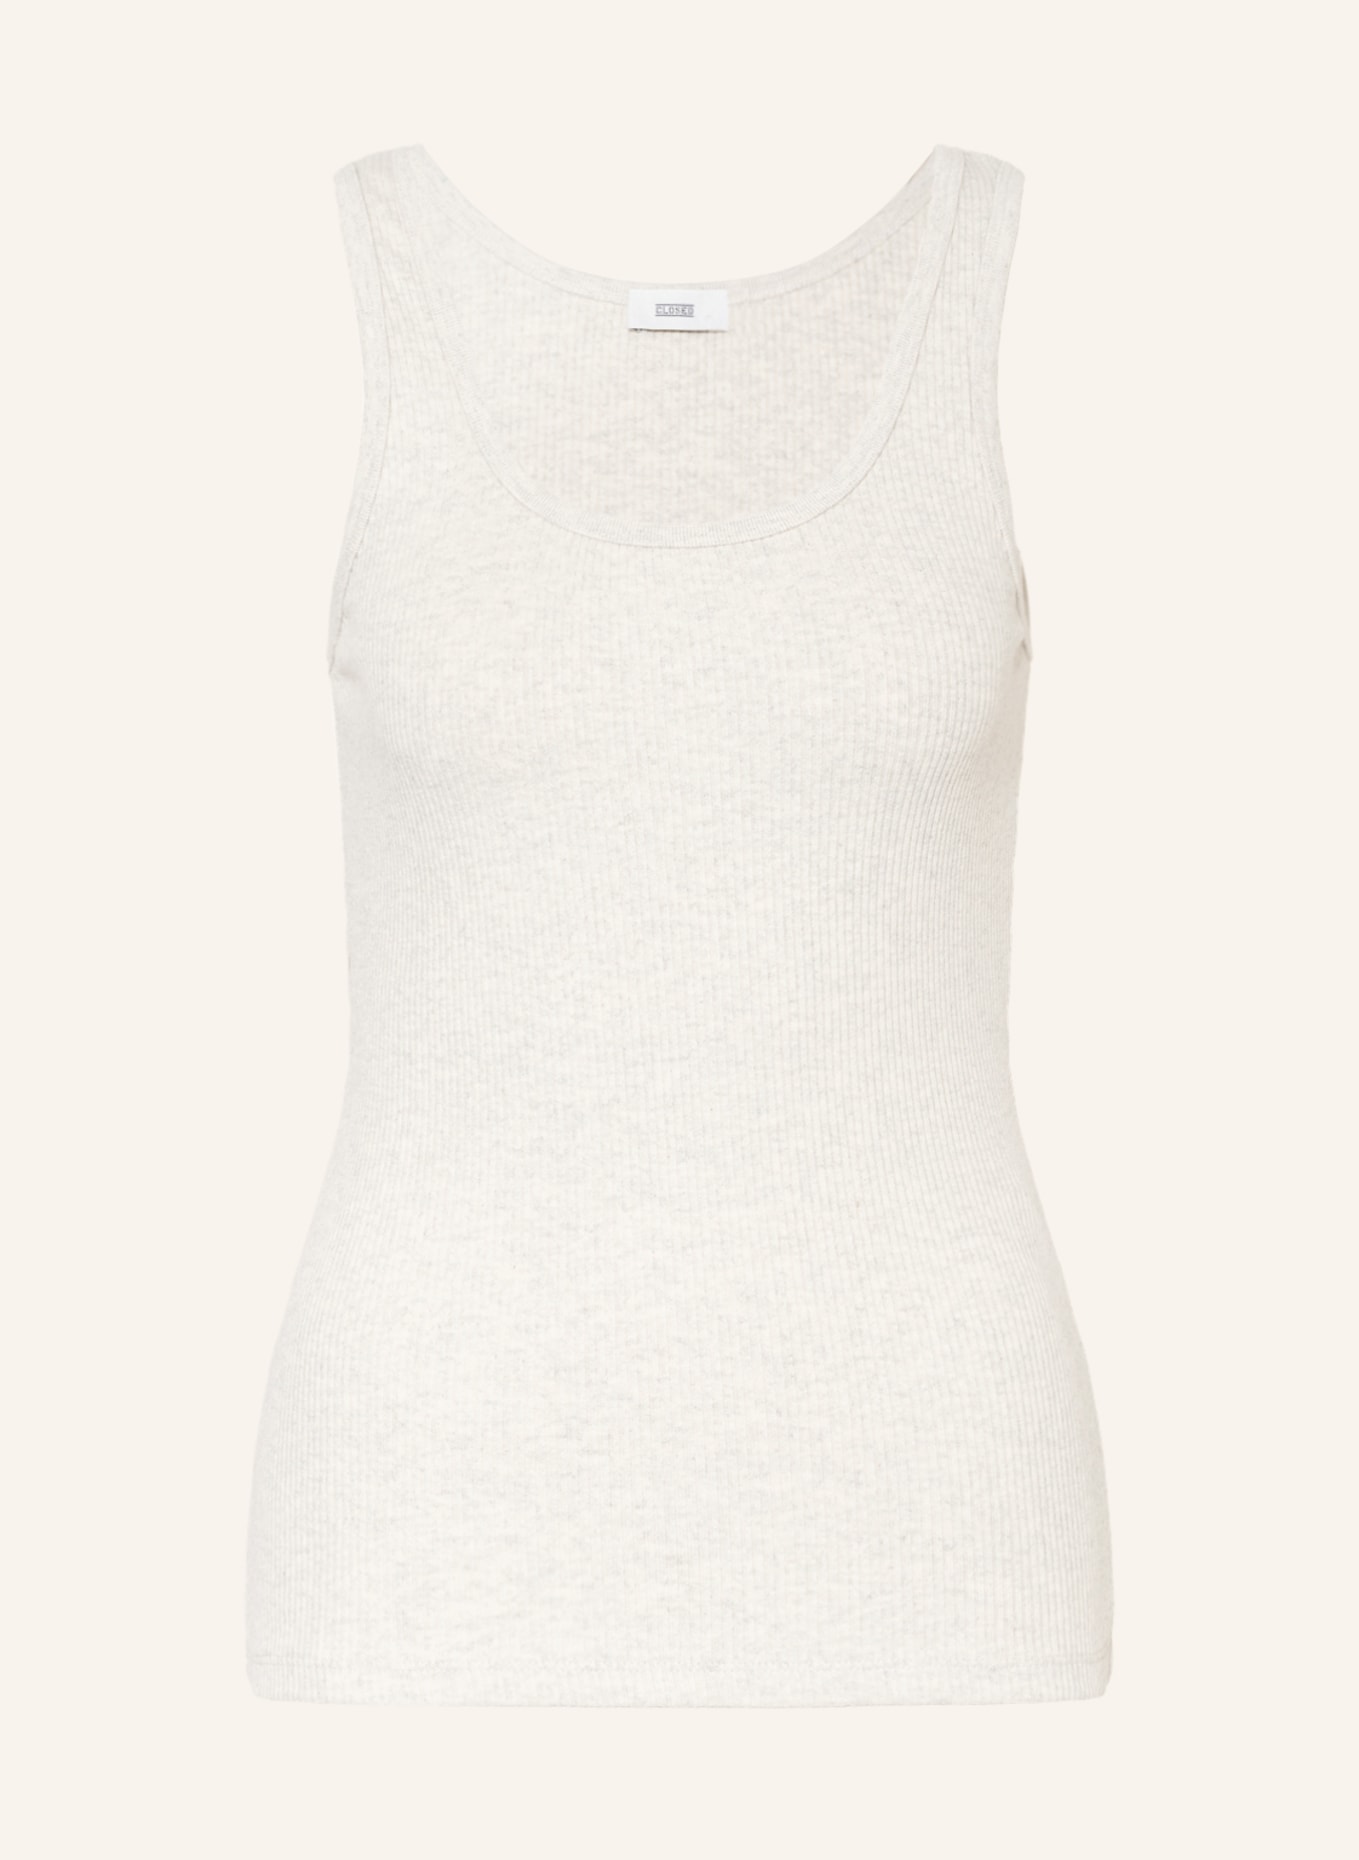 CLOSED Knit top, Color: LIGHT GRAY (Image 1)